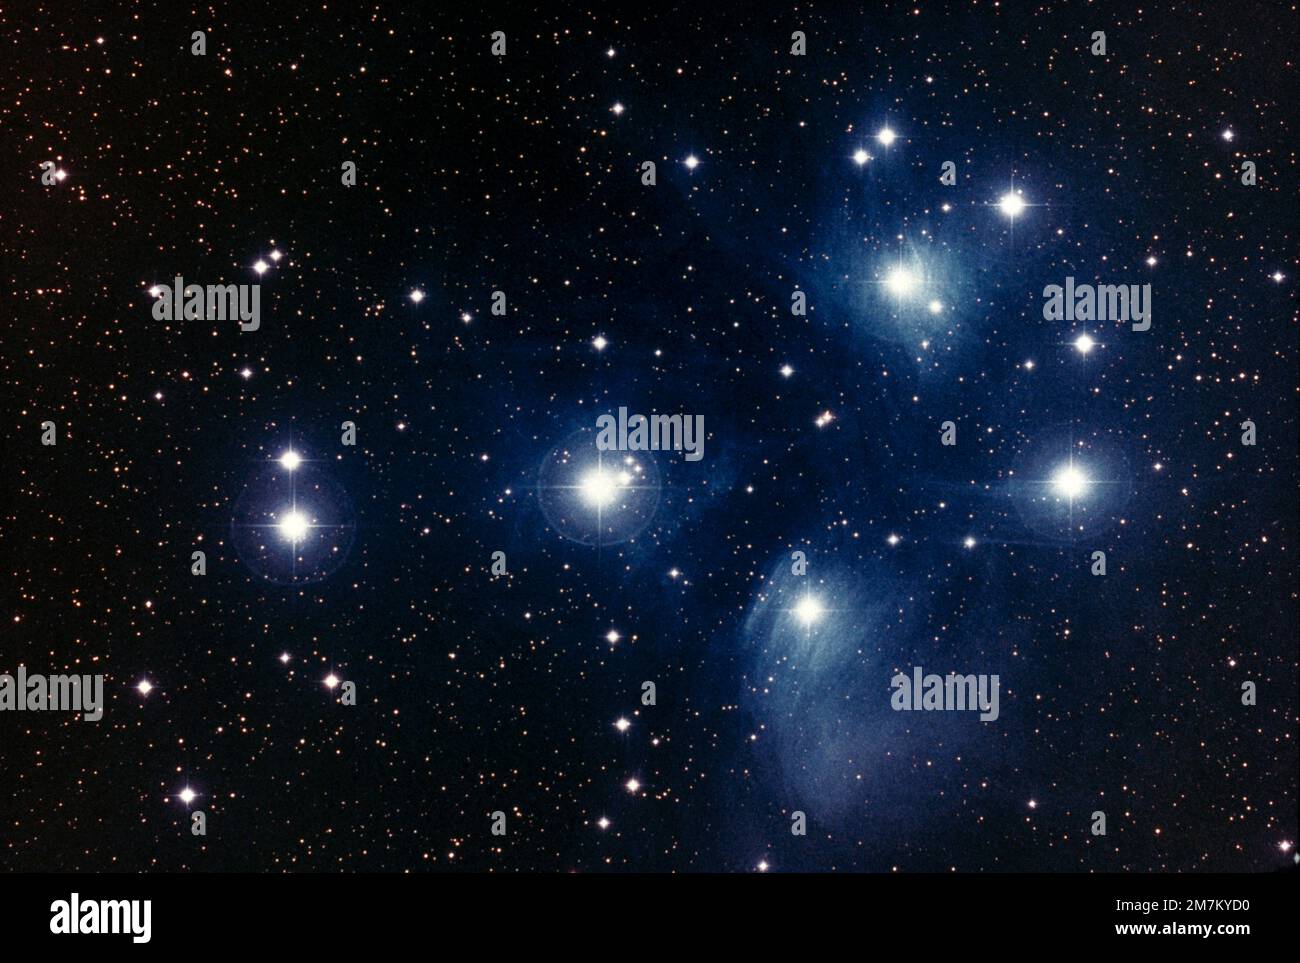 The Pleiades In Taurus Constellation an Open Star Cluster Stock Photo